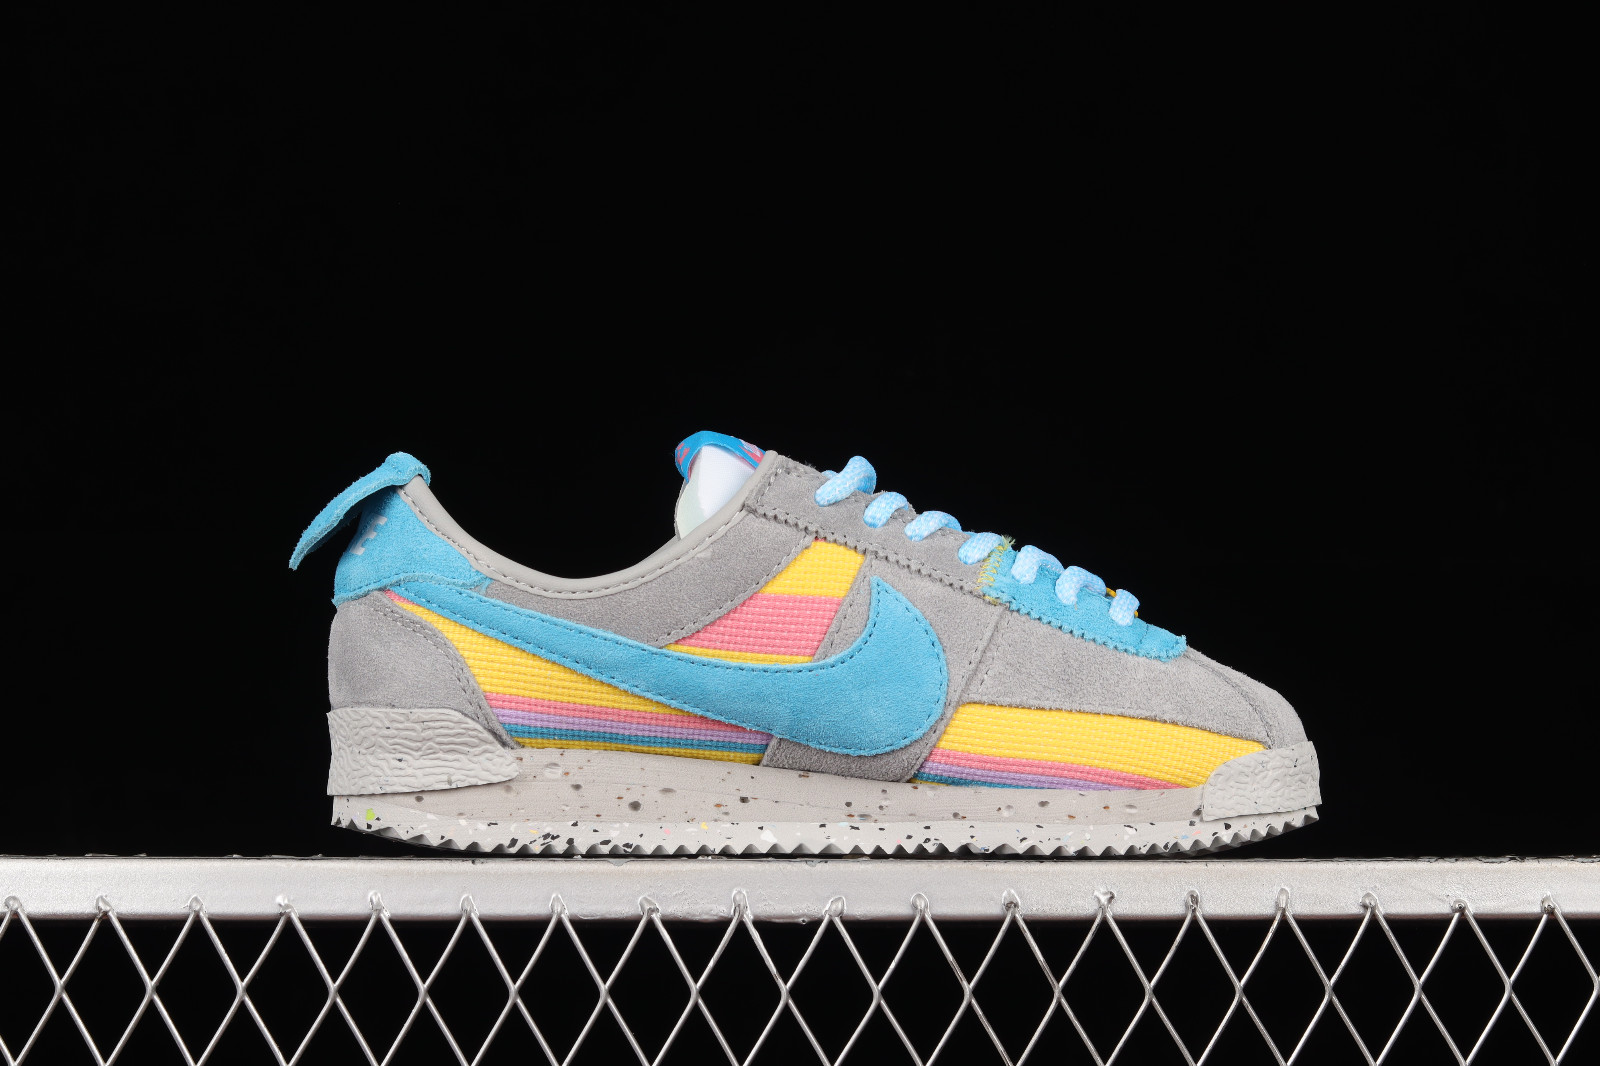 Union x Nike omega Cortez Blue Pink Yellow Grey DR1413 - nike omega lebron x ext qs blue mint gold silver spring - MultiscaleconsultingShops -